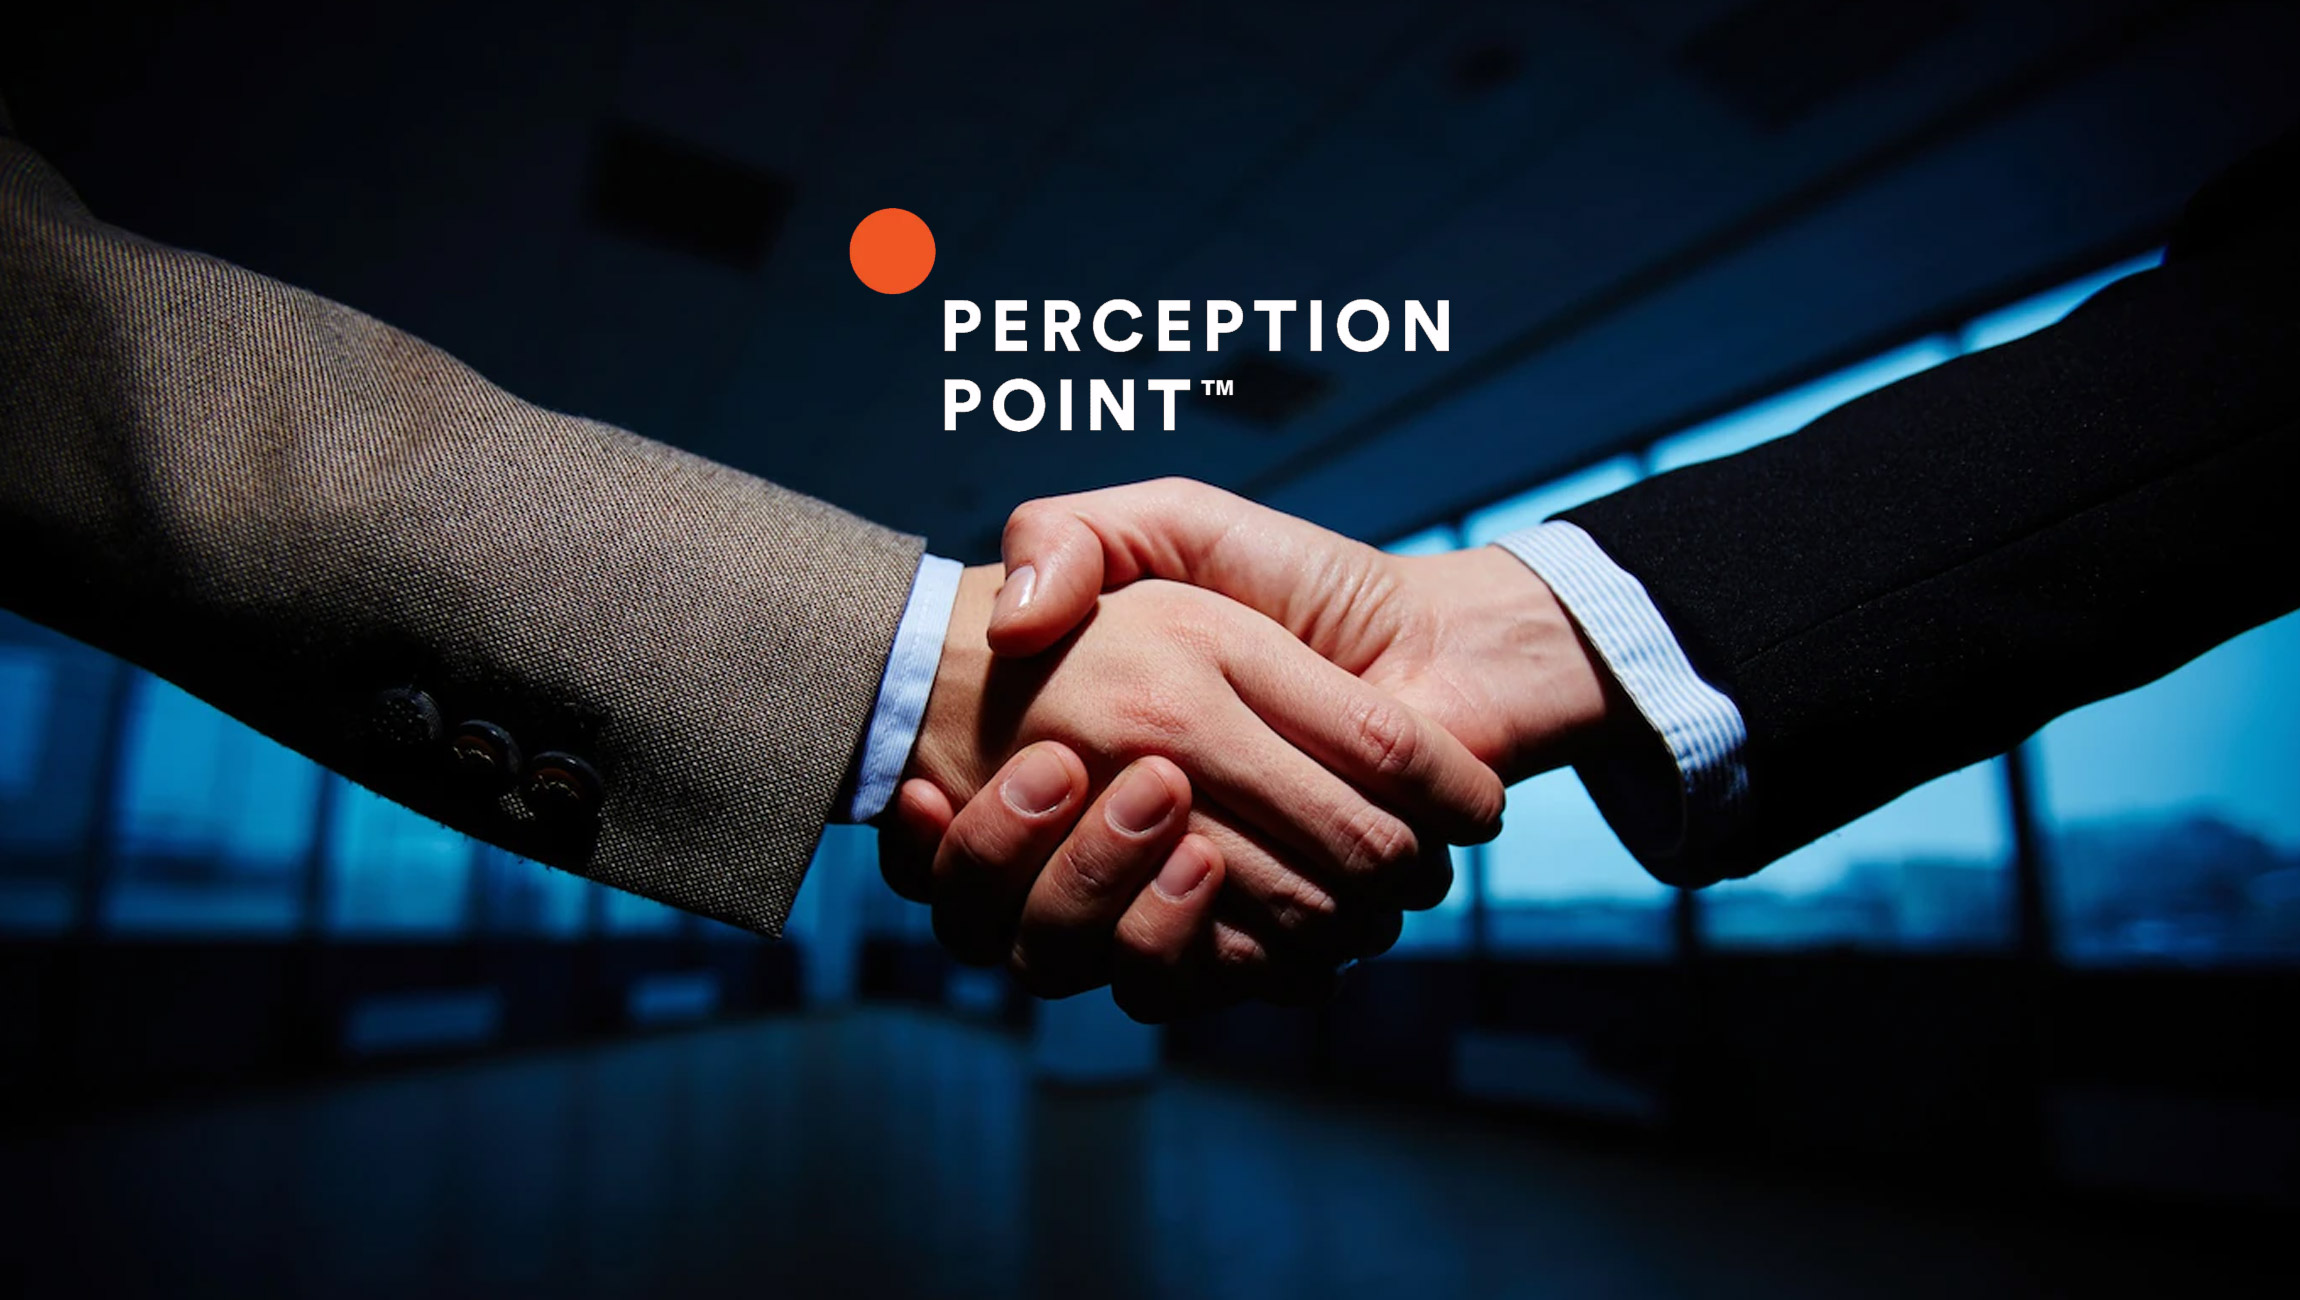 Perception Point Introduces New Partner Program Providing Partners With More Advanced Tools to Accelerate Resell Opportunities